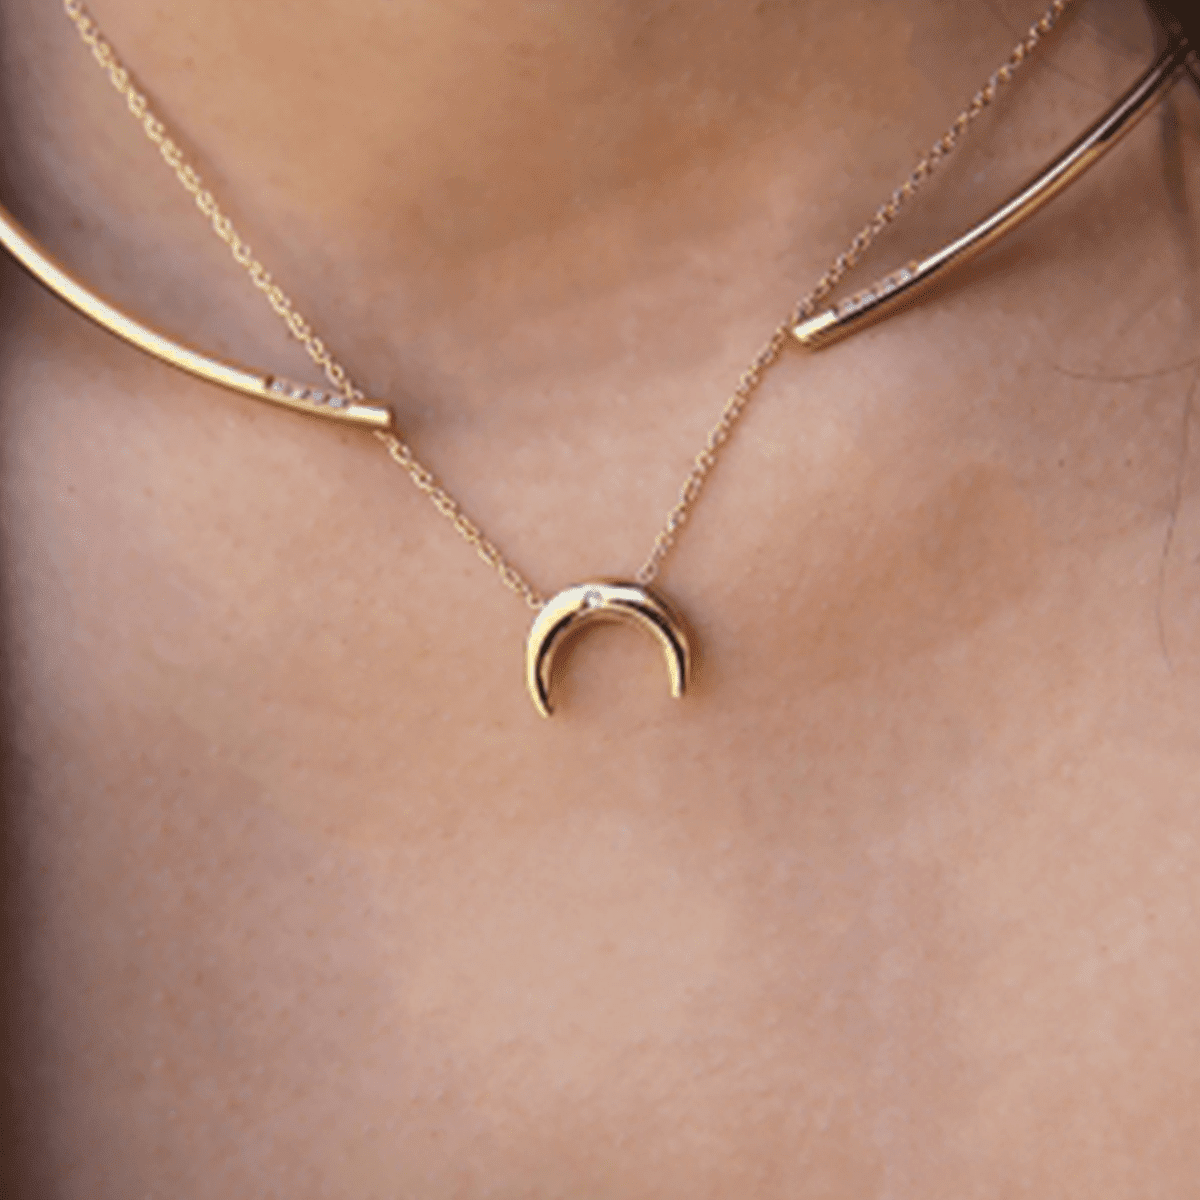 18k gold plated collar necklace and crescent moon pendant layered together - Tanzire